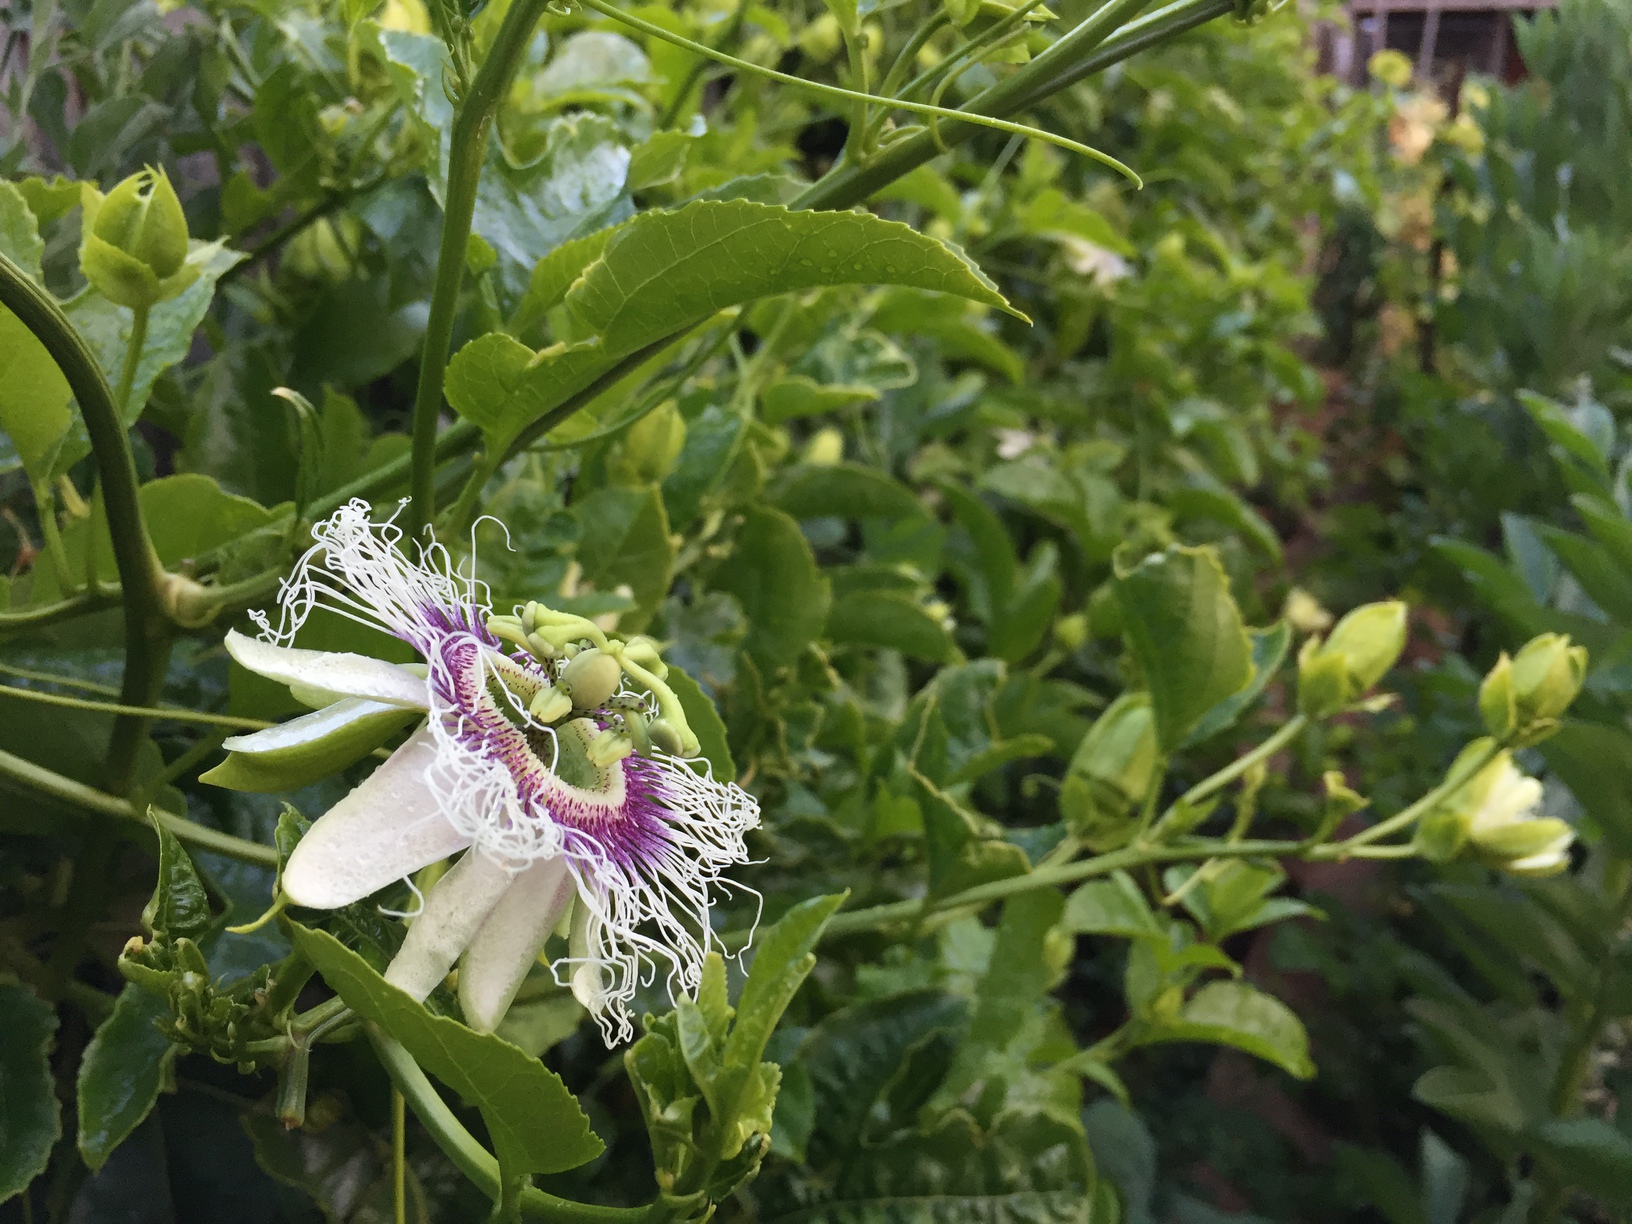 One of the many passionfruit flowers